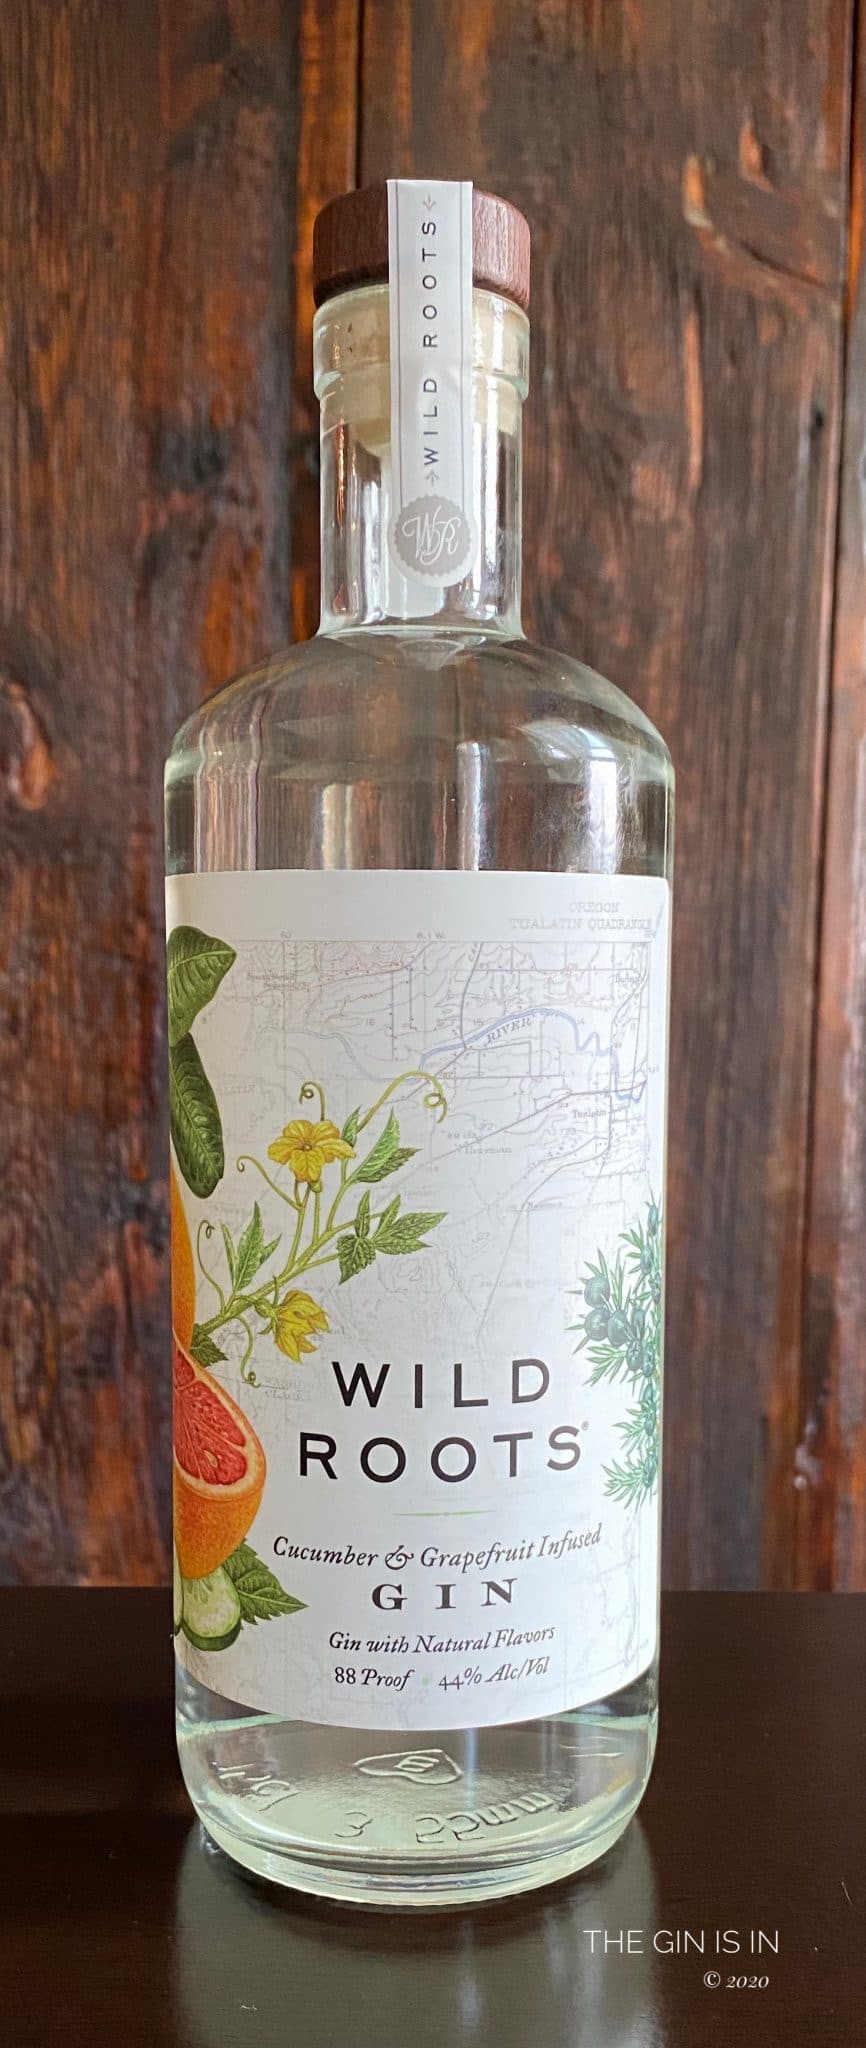 Wild Roots Cucumber and Grapefruit Infused Gin Expert Gin Review and